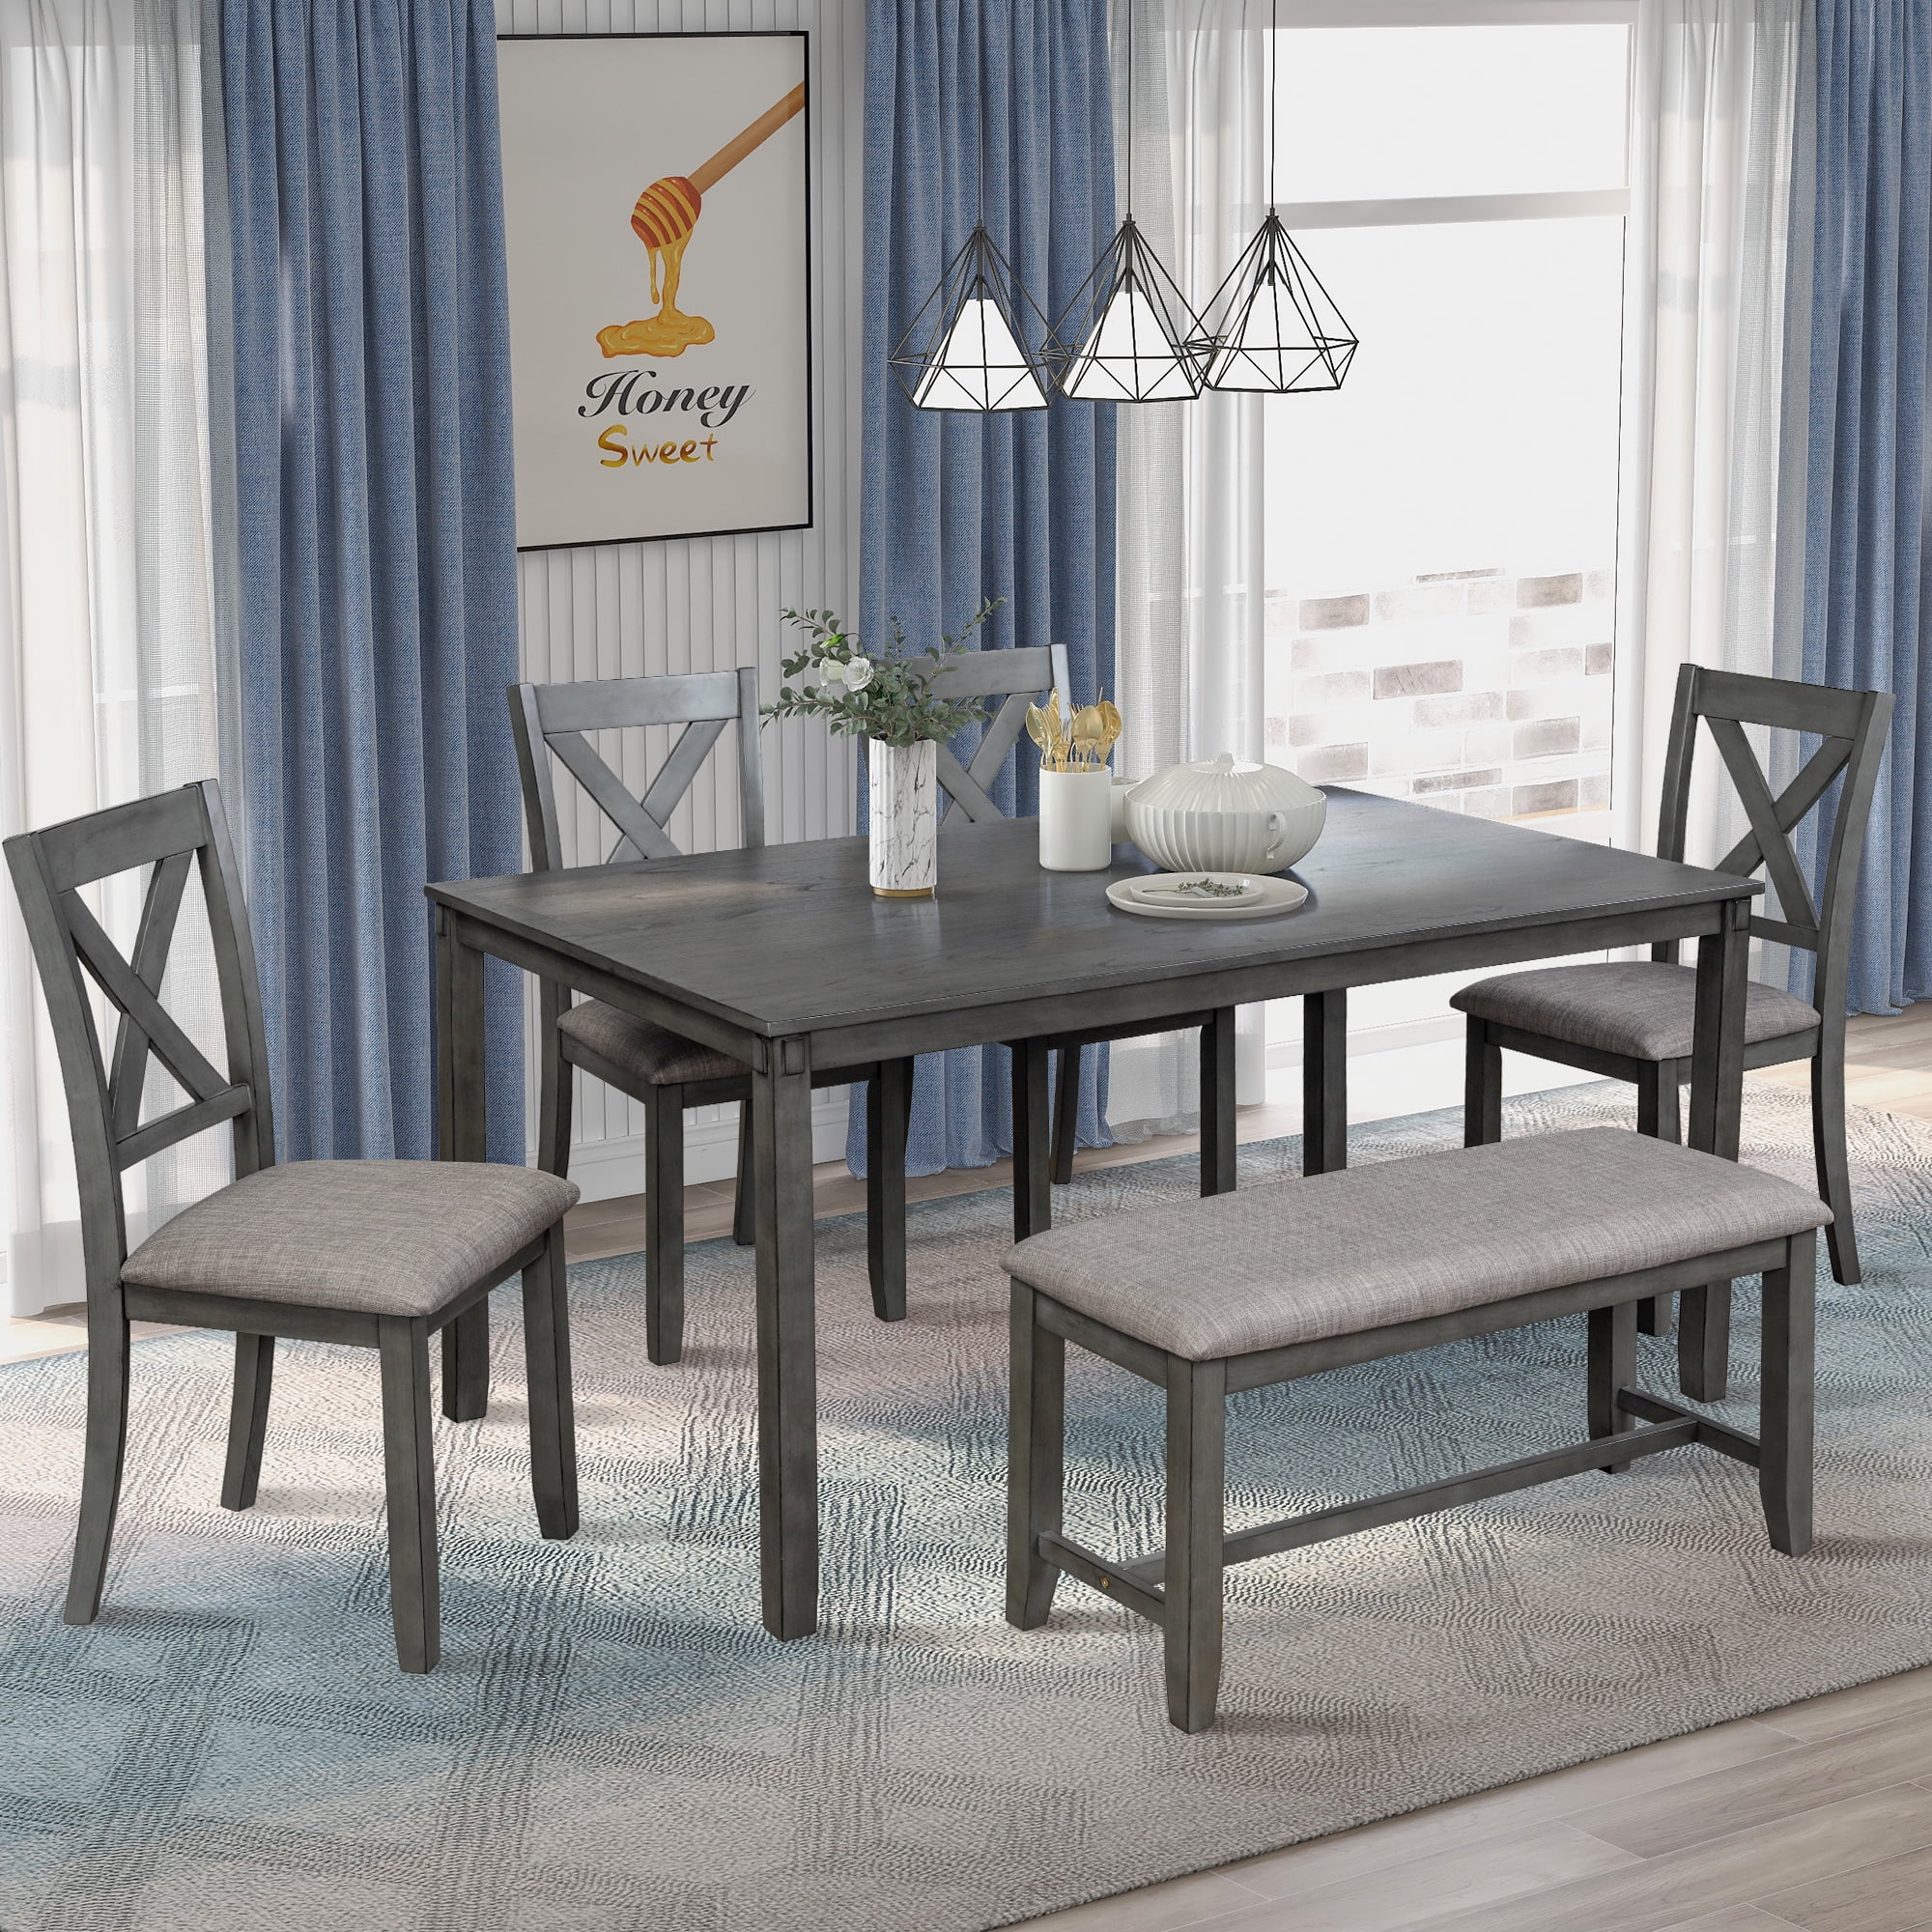 6 Piece Dining Table Set Modern Home, Kitchen Table Bench And Chairs Set